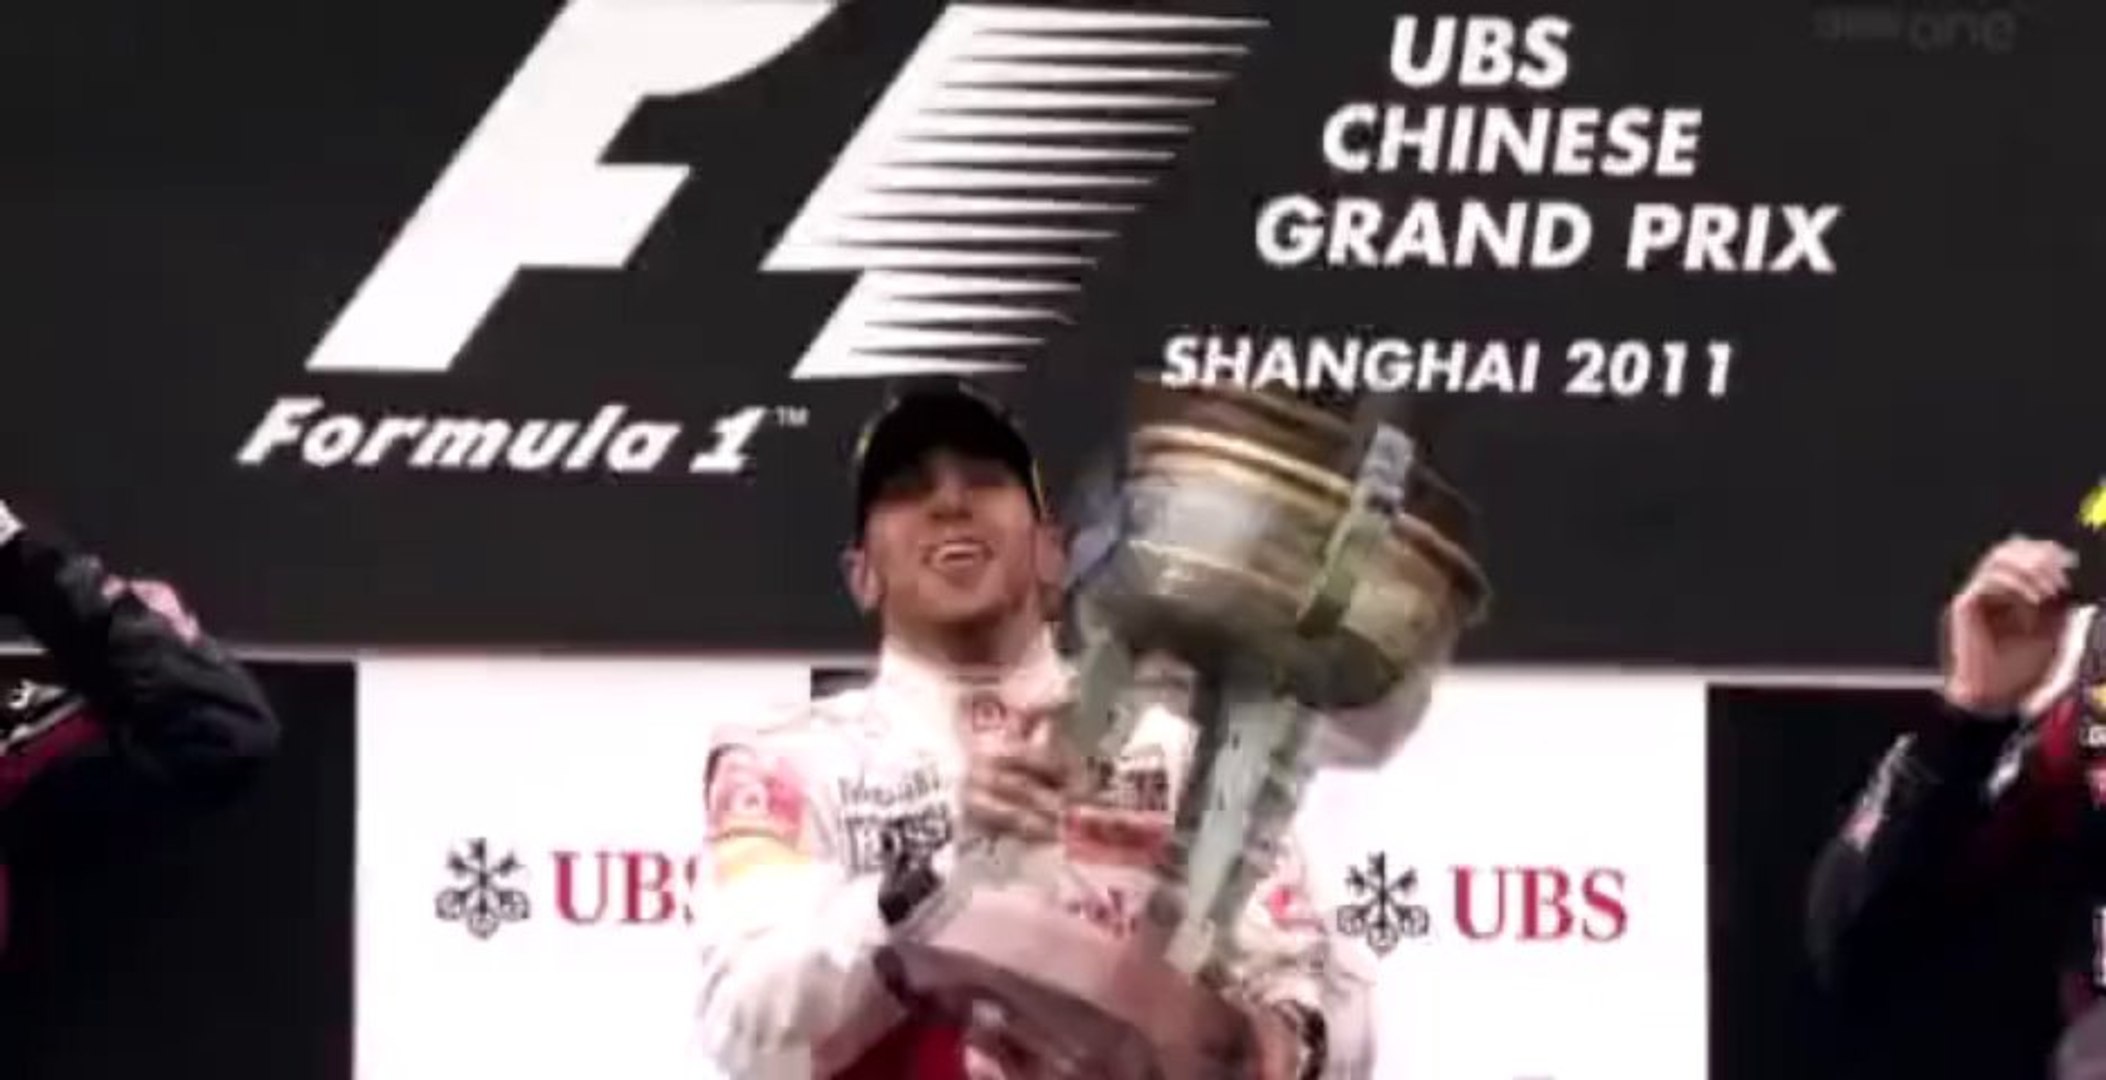 BBC F1 2011: Race Outro (2011 Chinese Grand Prix) - video Dailymotion